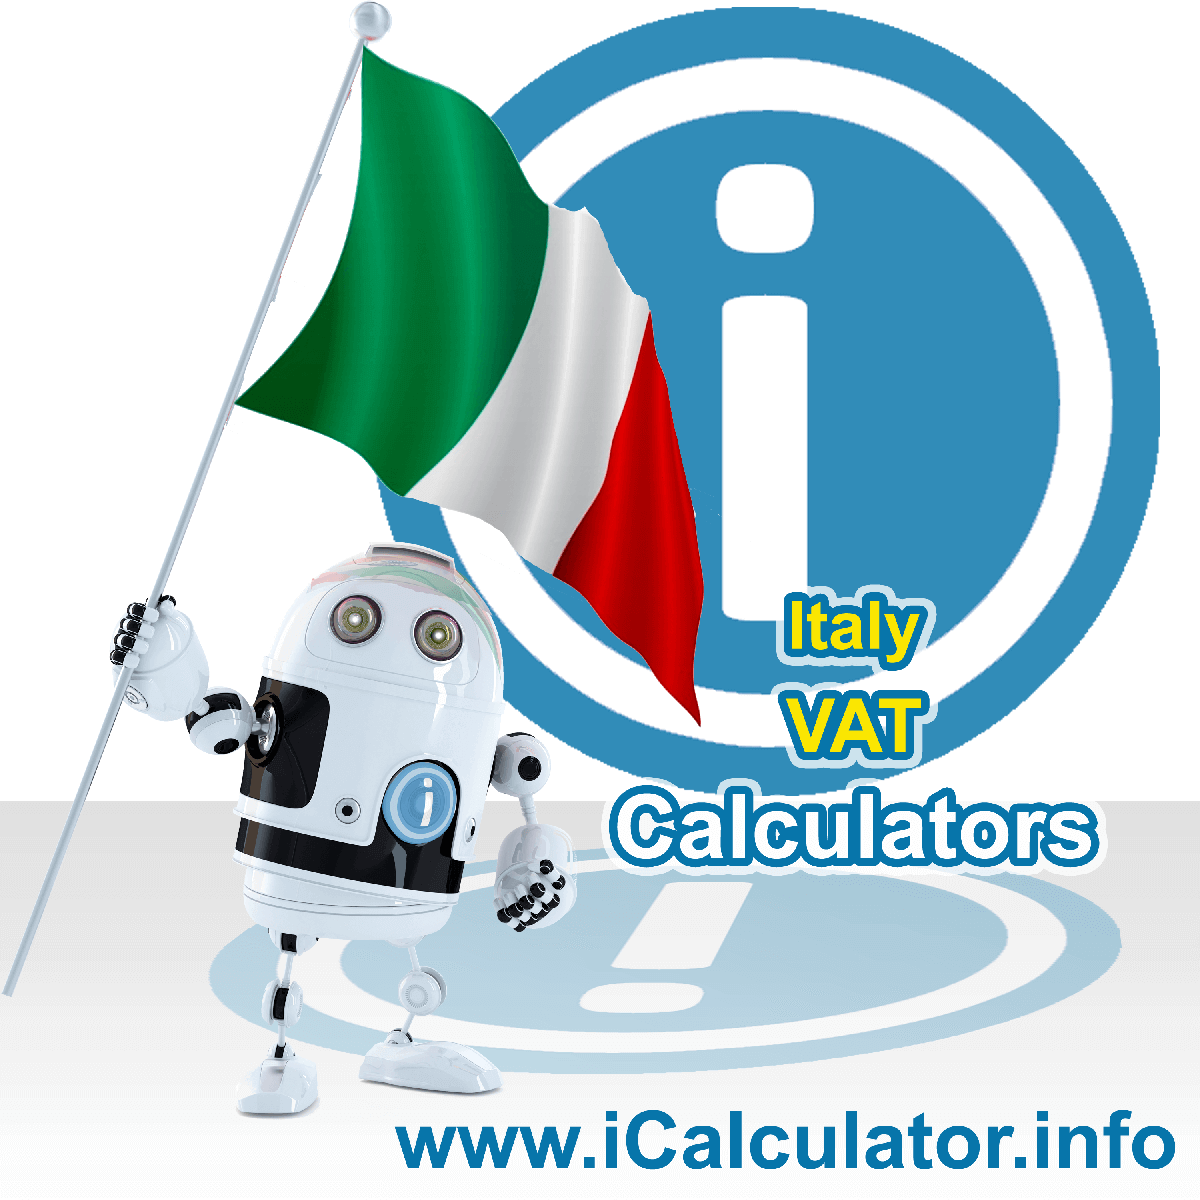 Italy VAT Calculator. This image shows the Italy flag and information relating to the VAT formula used for calculating Value Added Tax in Italy using the Italy VAT Calculator in 2023